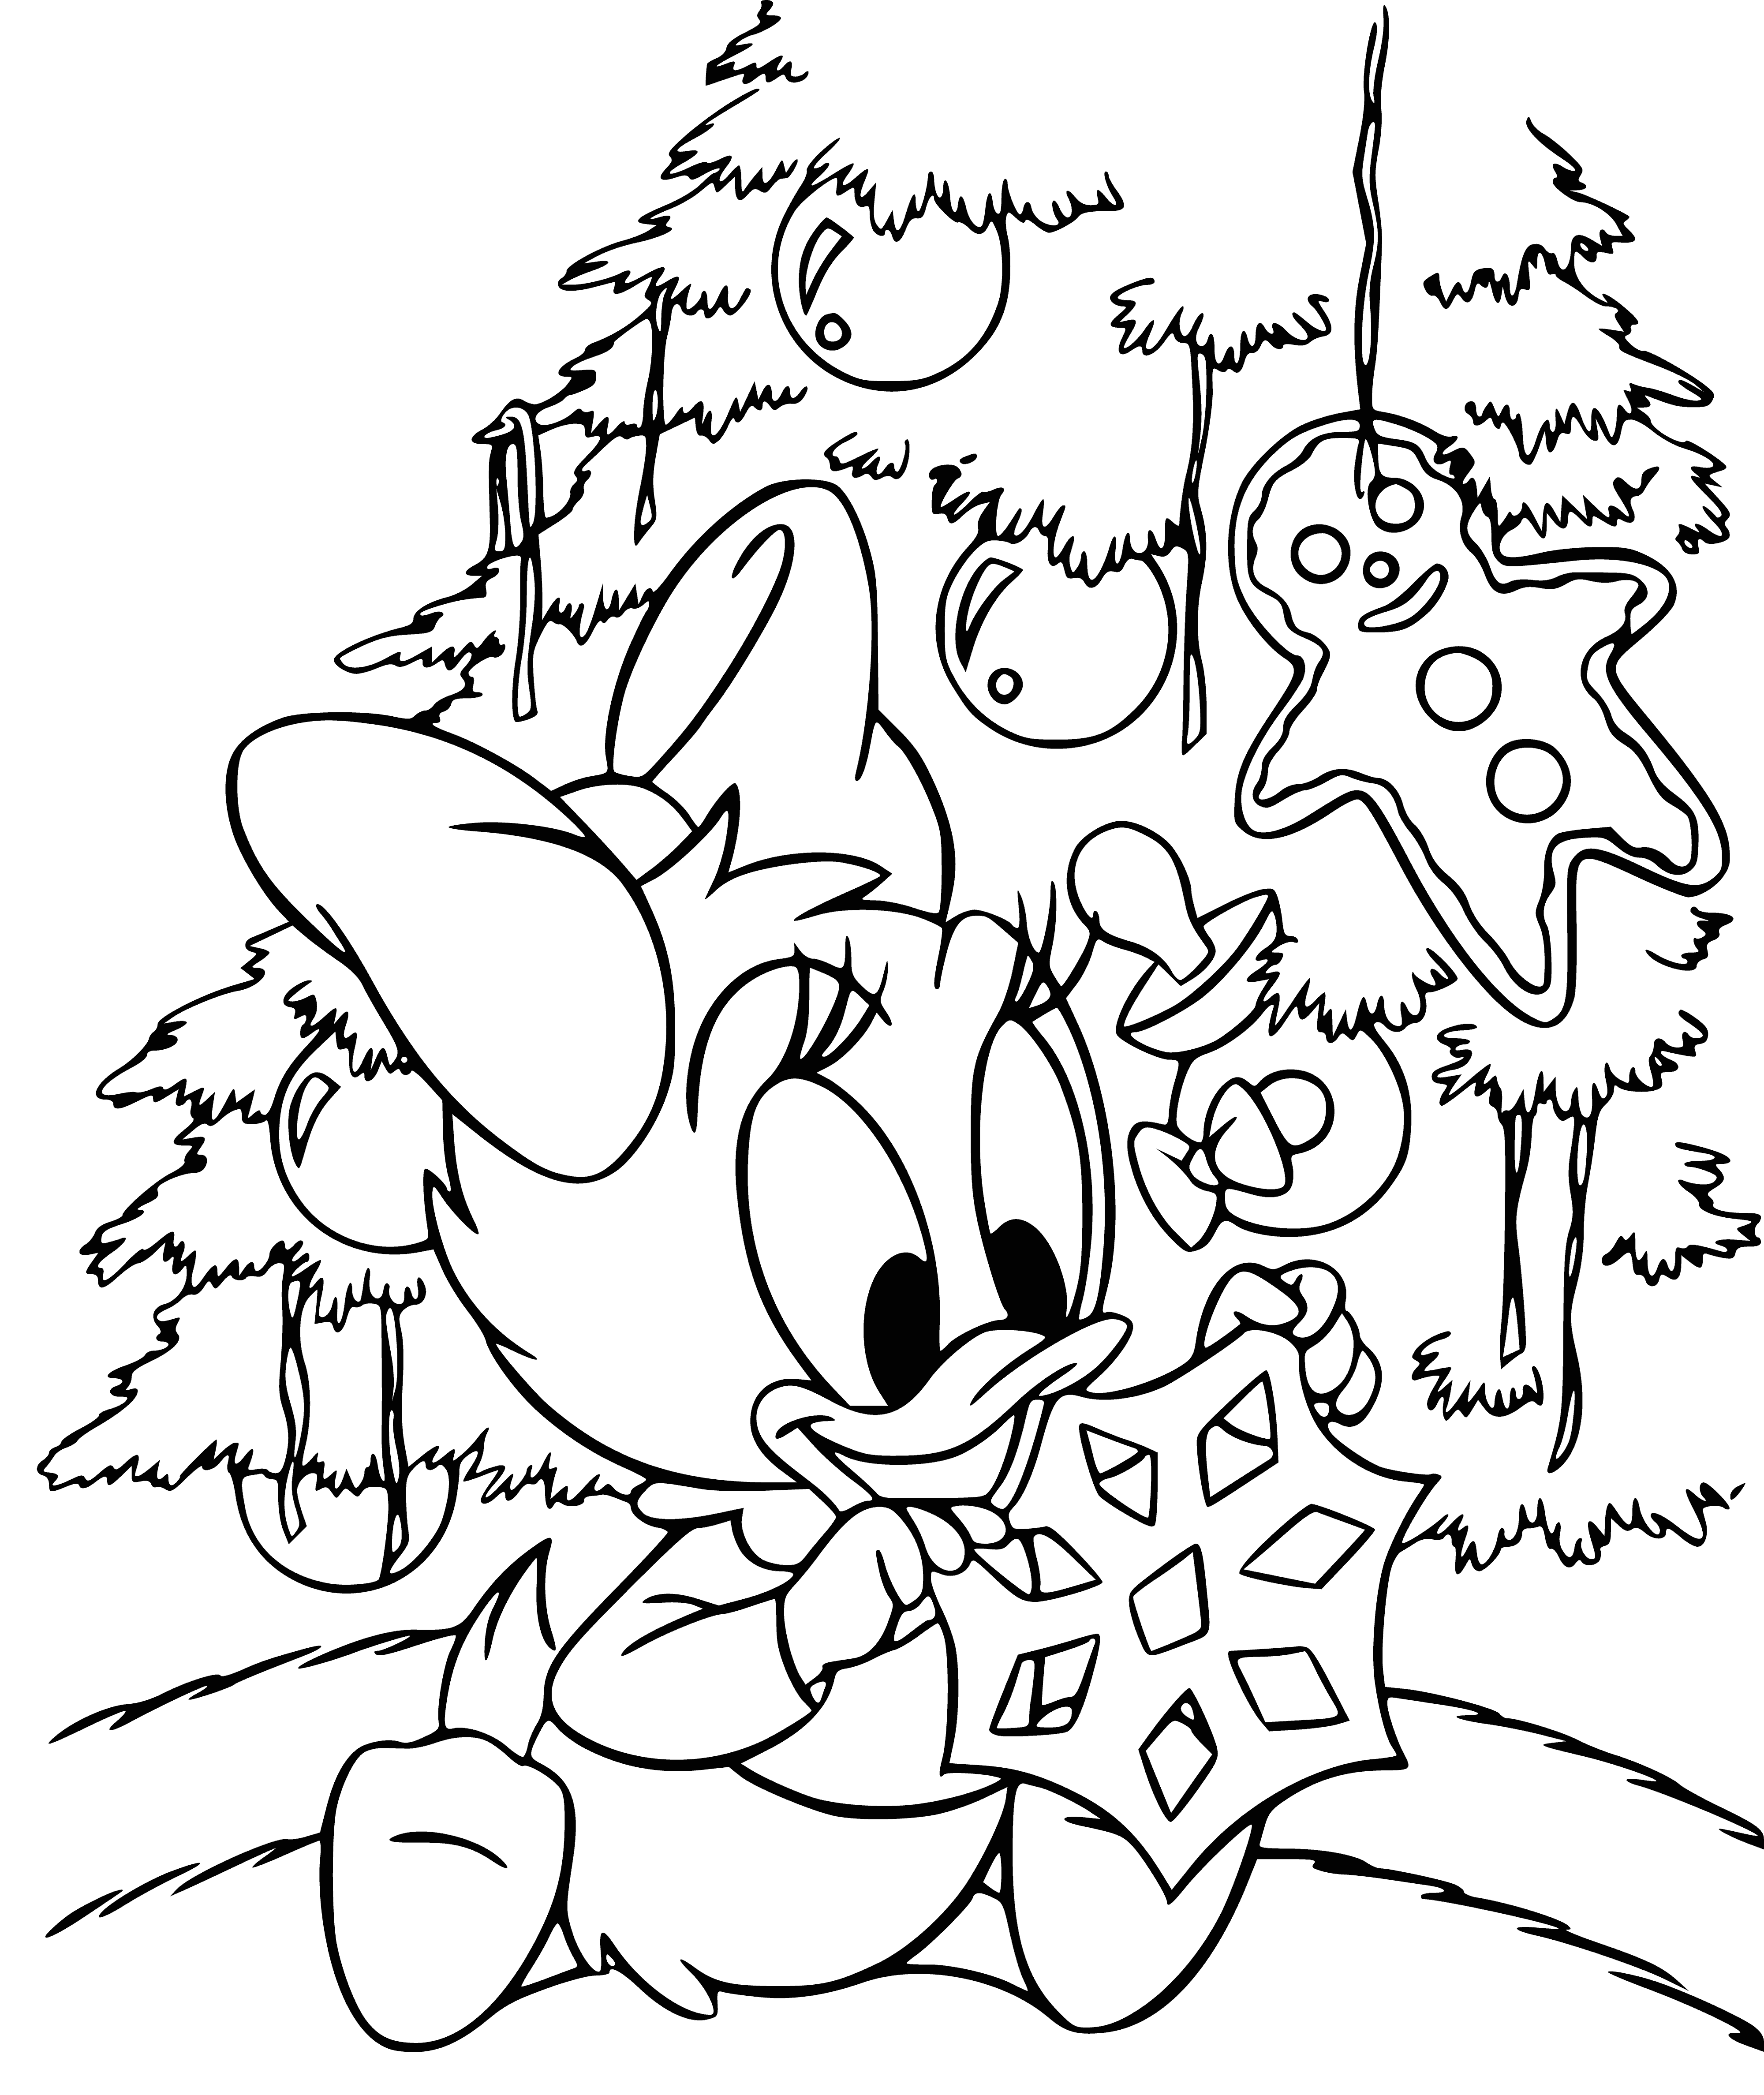 coloring page: Disney characters celebrate New Year together, dancing and cheering amid streamers, balloons & clock ticking to midnight!